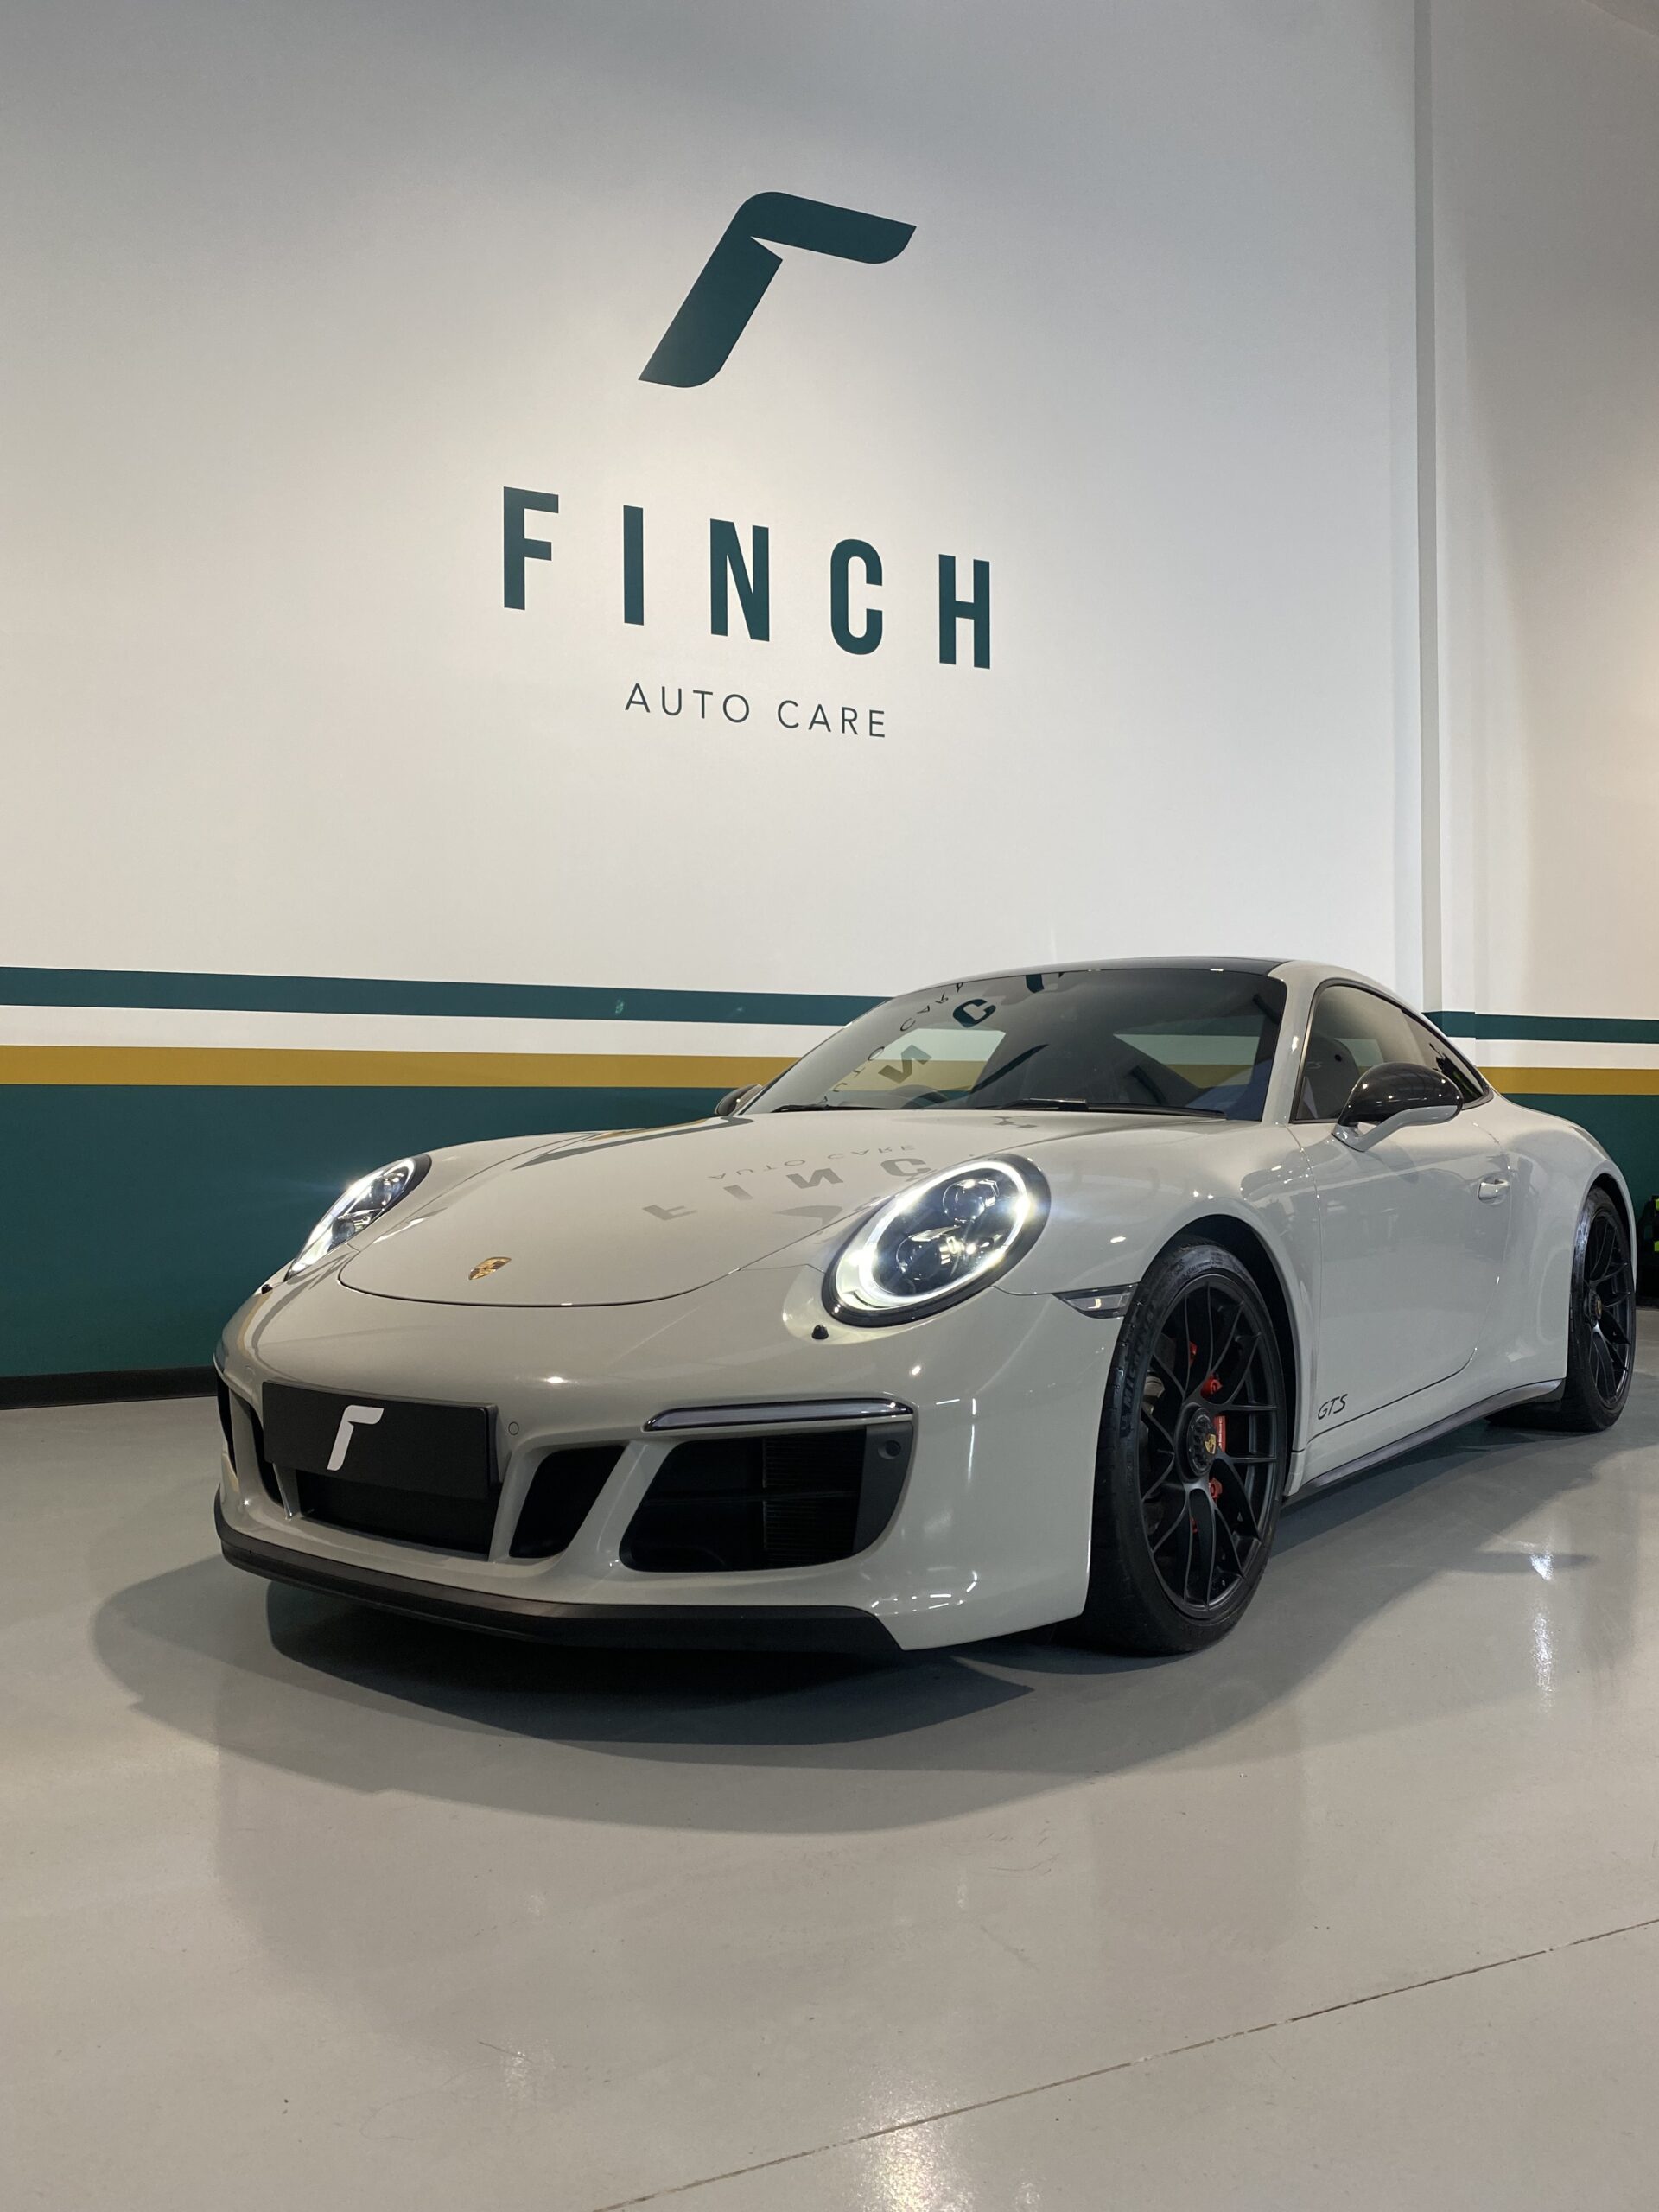 A white porsche parked inside a facility with "finch auto care" written on the wall.